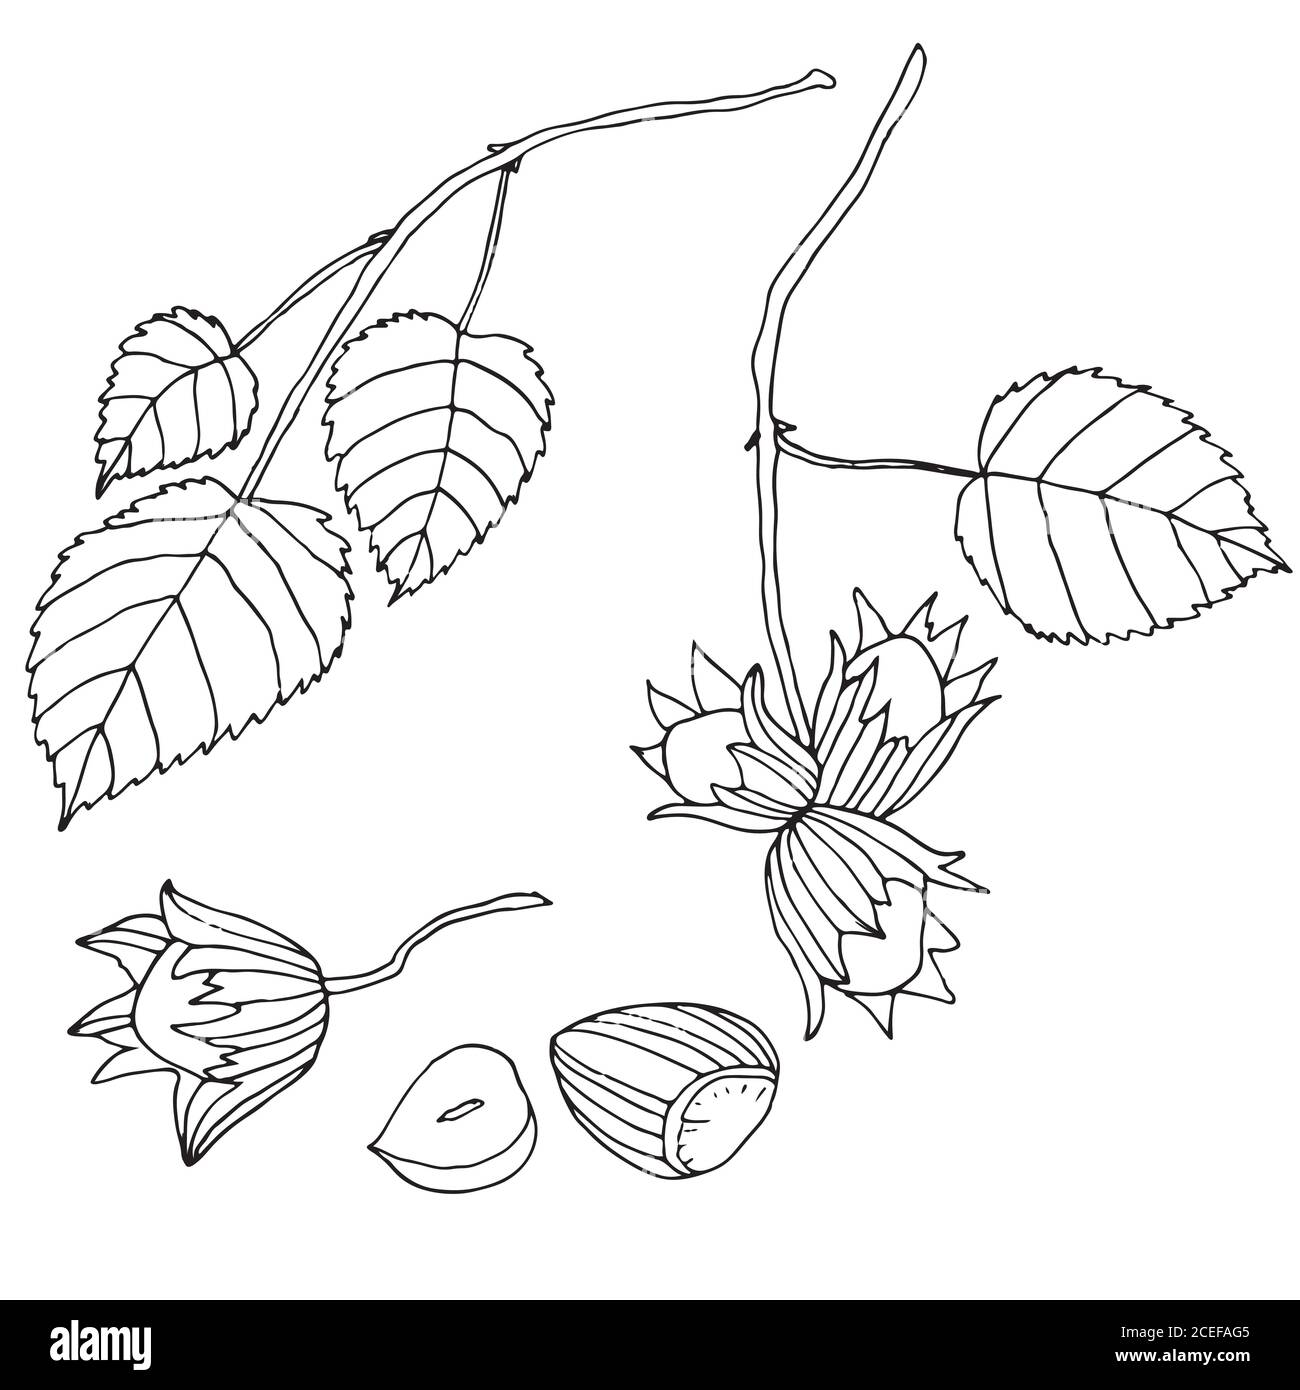 Black and white set hazelnuts, isolated.Branch with leaves and r Stock Vector